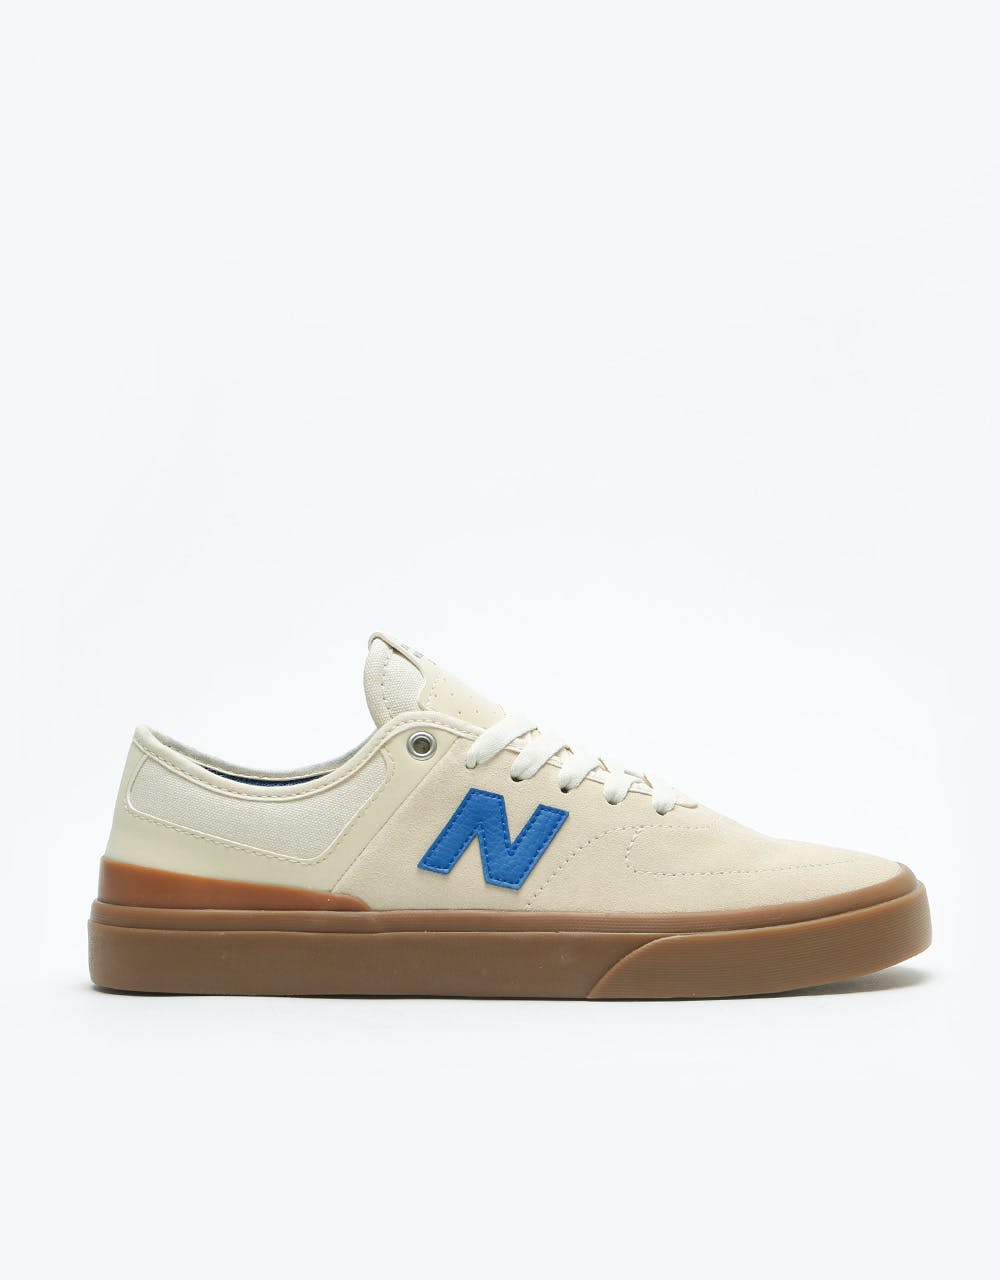 New Balance Numeric 379 Skate Shoes - White/Royal – Route One